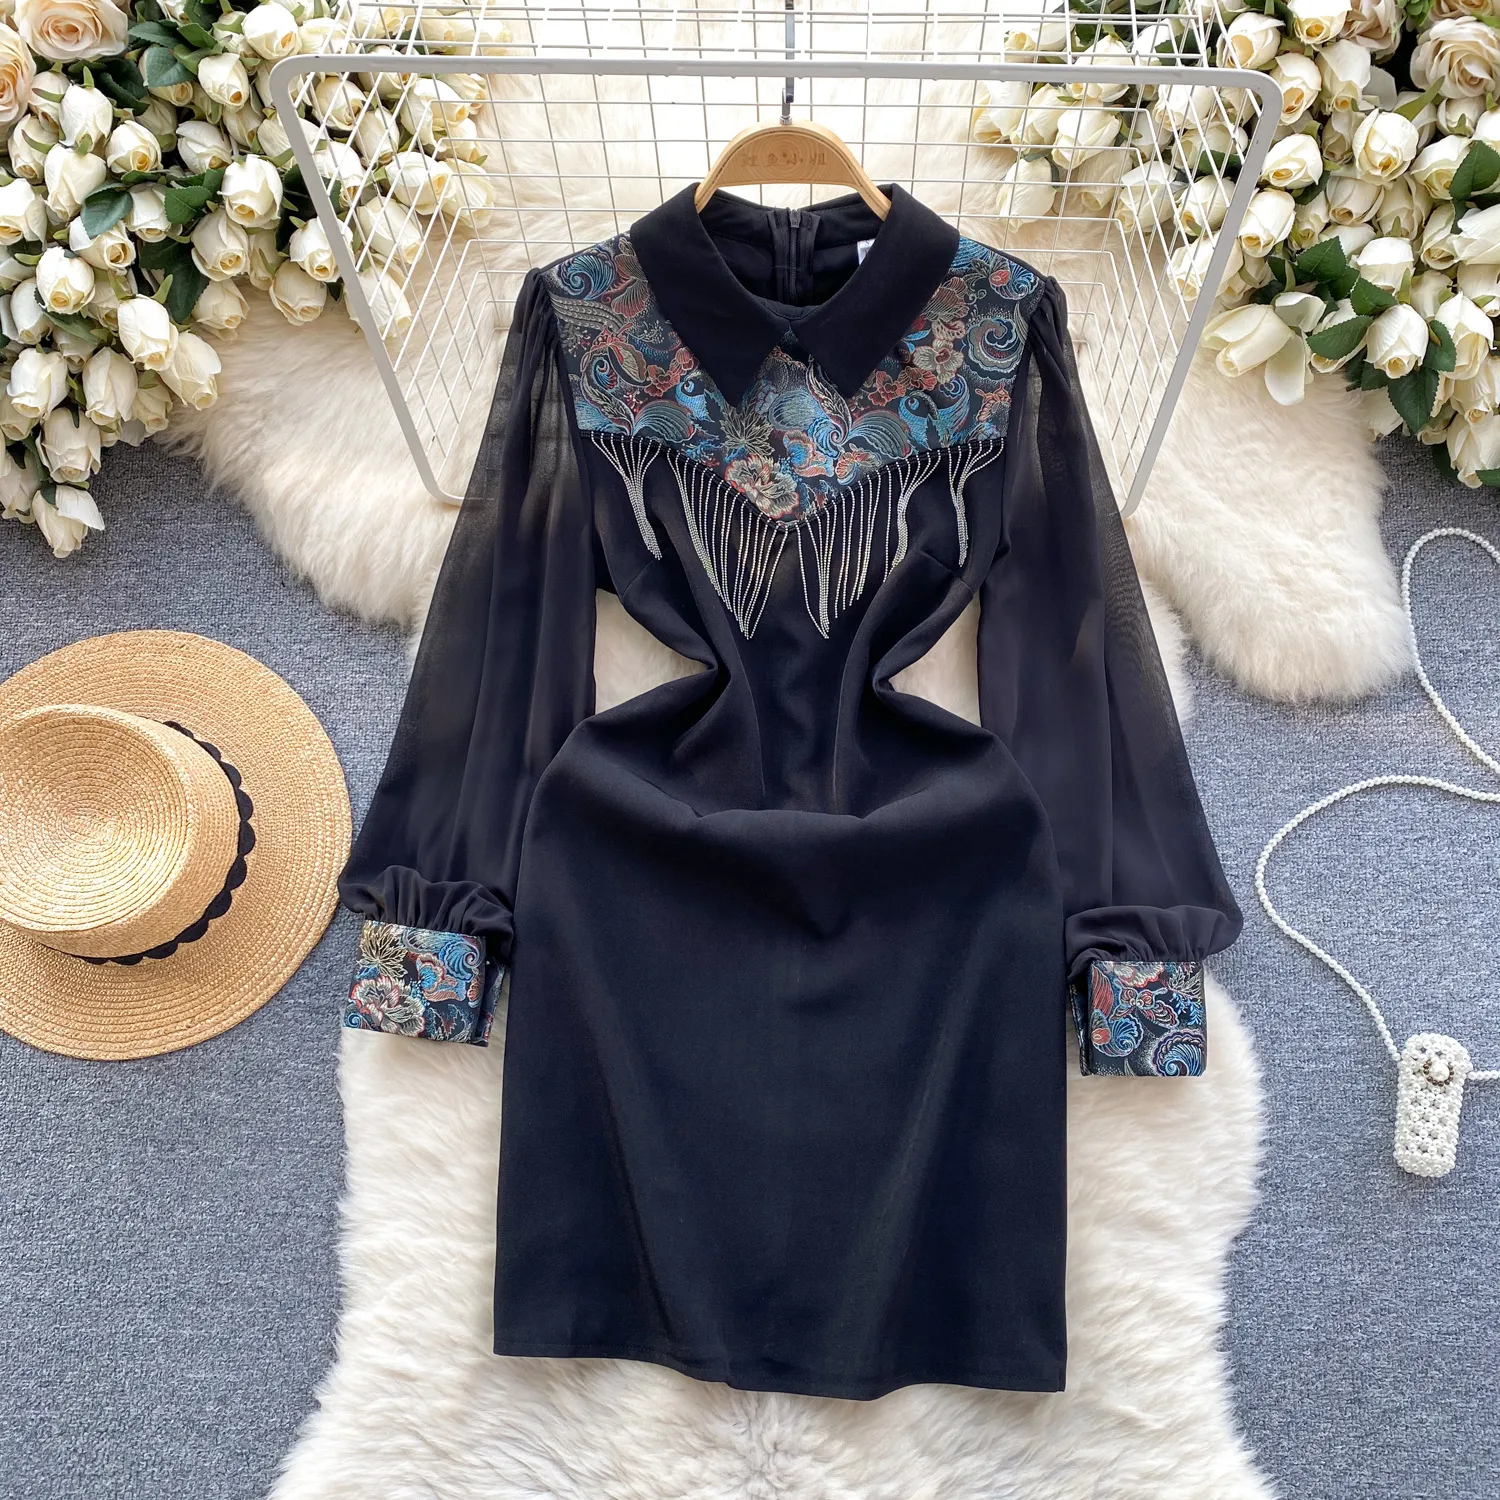 National style retro heavy industry embroidery tassel splicing slim fit short style, age reducing bubble sleeve temperament dress, spring fashion for women